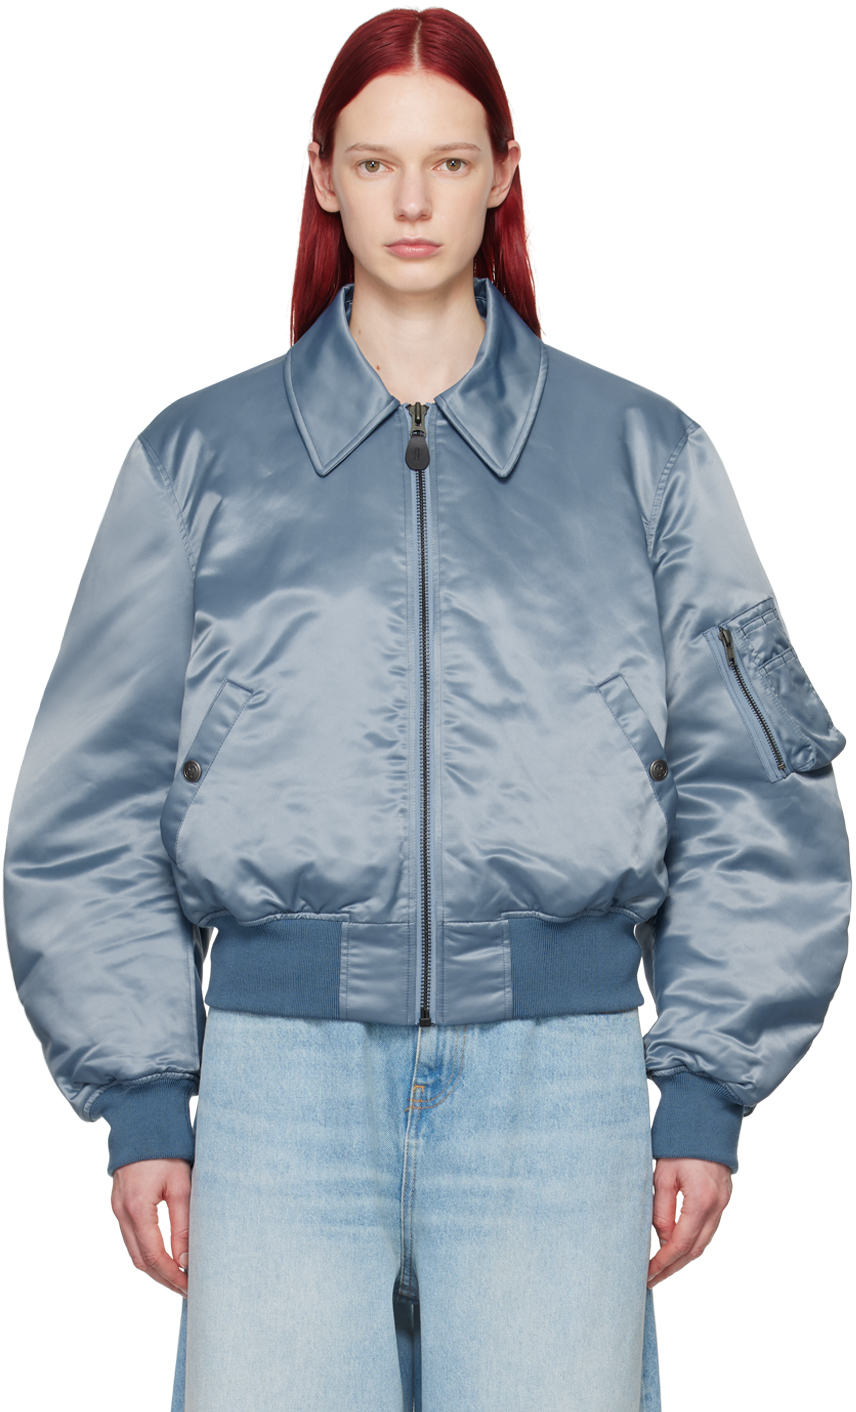 Martine Rose Blue Graphic Bomber Jacket In Petrol